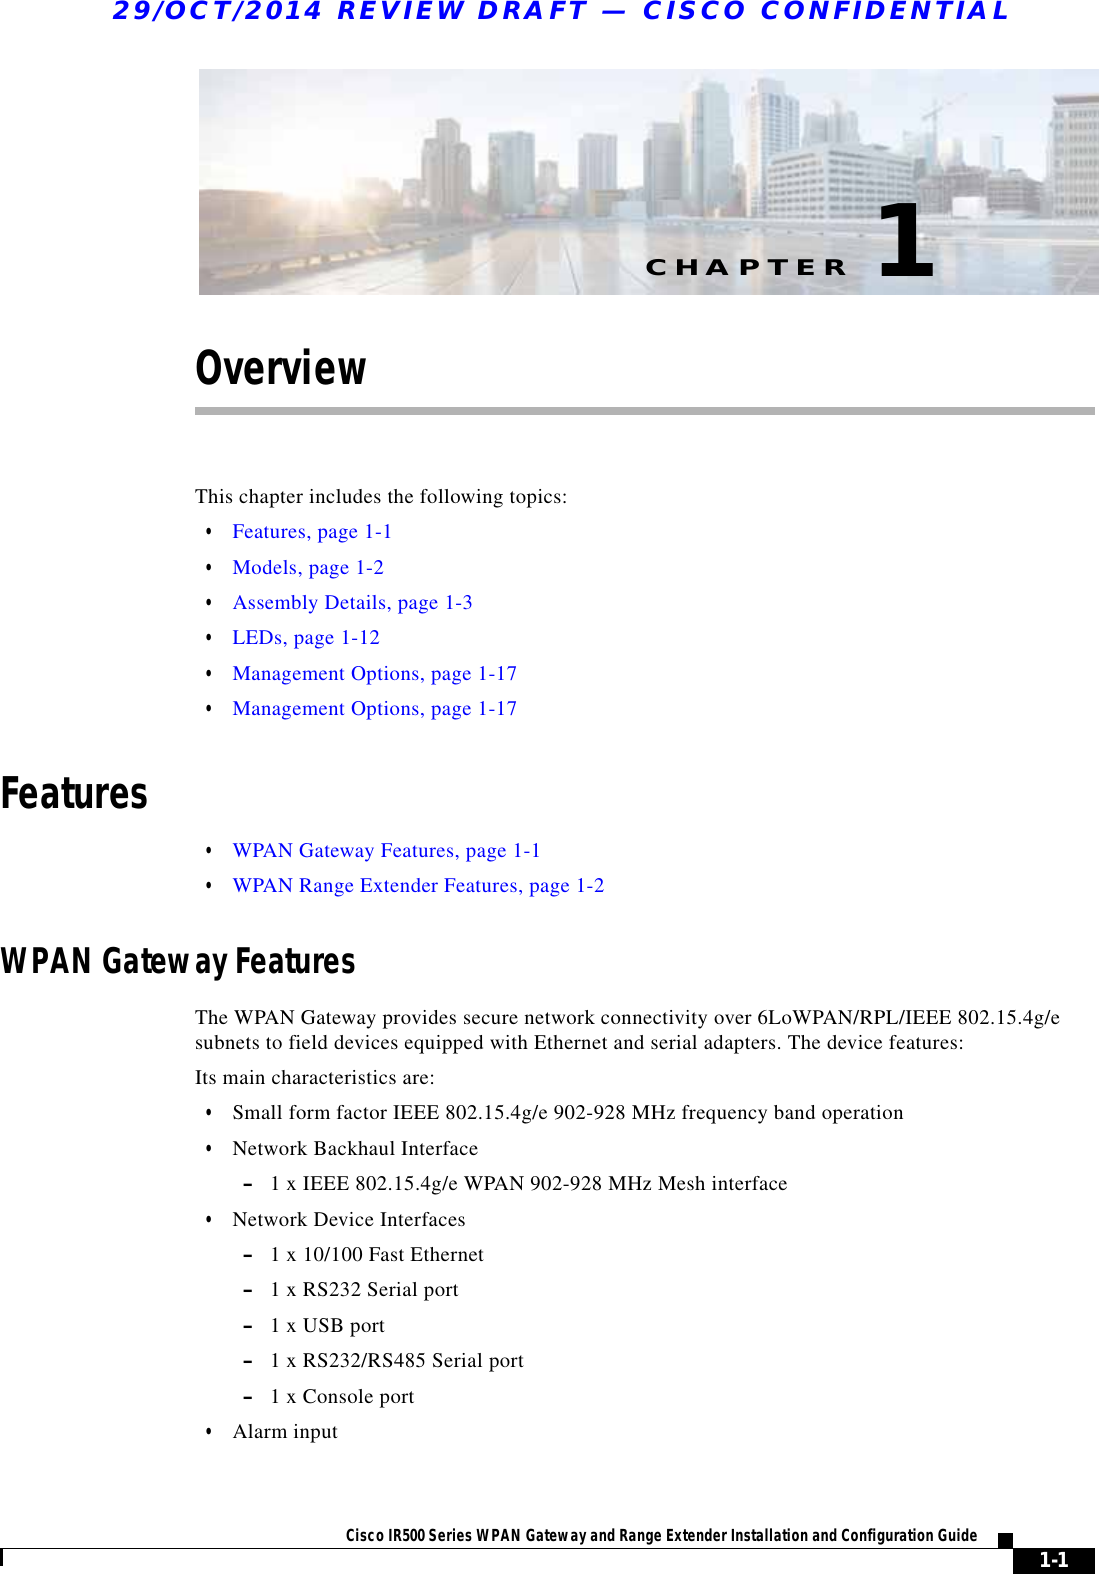 CHAPTER29/OCT/2014 REVIEW DRAFT — CISCO CONFIDENTIAL1-1Cisco IR500 Series WPAN Gateway and Range Extender Installation and Configuration Guide 1OverviewThis chapter includes the following topics:  • Features, page 1-1  • Models, page 1-2  • Assembly Details, page 1-3  • LEDs, page 1-12  • Management Options, page 1-17  • Management Options, page 1-17Features  • WPAN Gateway Features, page 1-1  • WPAN Range Extender Features, page 1-2WPAN Gateway FeaturesThe WPAN Gateway provides secure network connectivity over 6LoWPAN/RPL/IEEE 802.15.4g/e subnets to field devices equipped with Ethernet and serial adapters. The device features:Its main characteristics are:  • Small form factor IEEE 802.15.4g/e 902-928 MHz frequency band operation  • Network Backhaul Interface –1 x IEEE 802.15.4g/e WPAN 902-928 MHz Mesh interface  • Network Device Interfaces –1 x 10/100 Fast Ethernet –1 x RS232 Serial port –1 x USB port –1 x RS232/RS485 Serial port –1 x Console port  • Alarm input